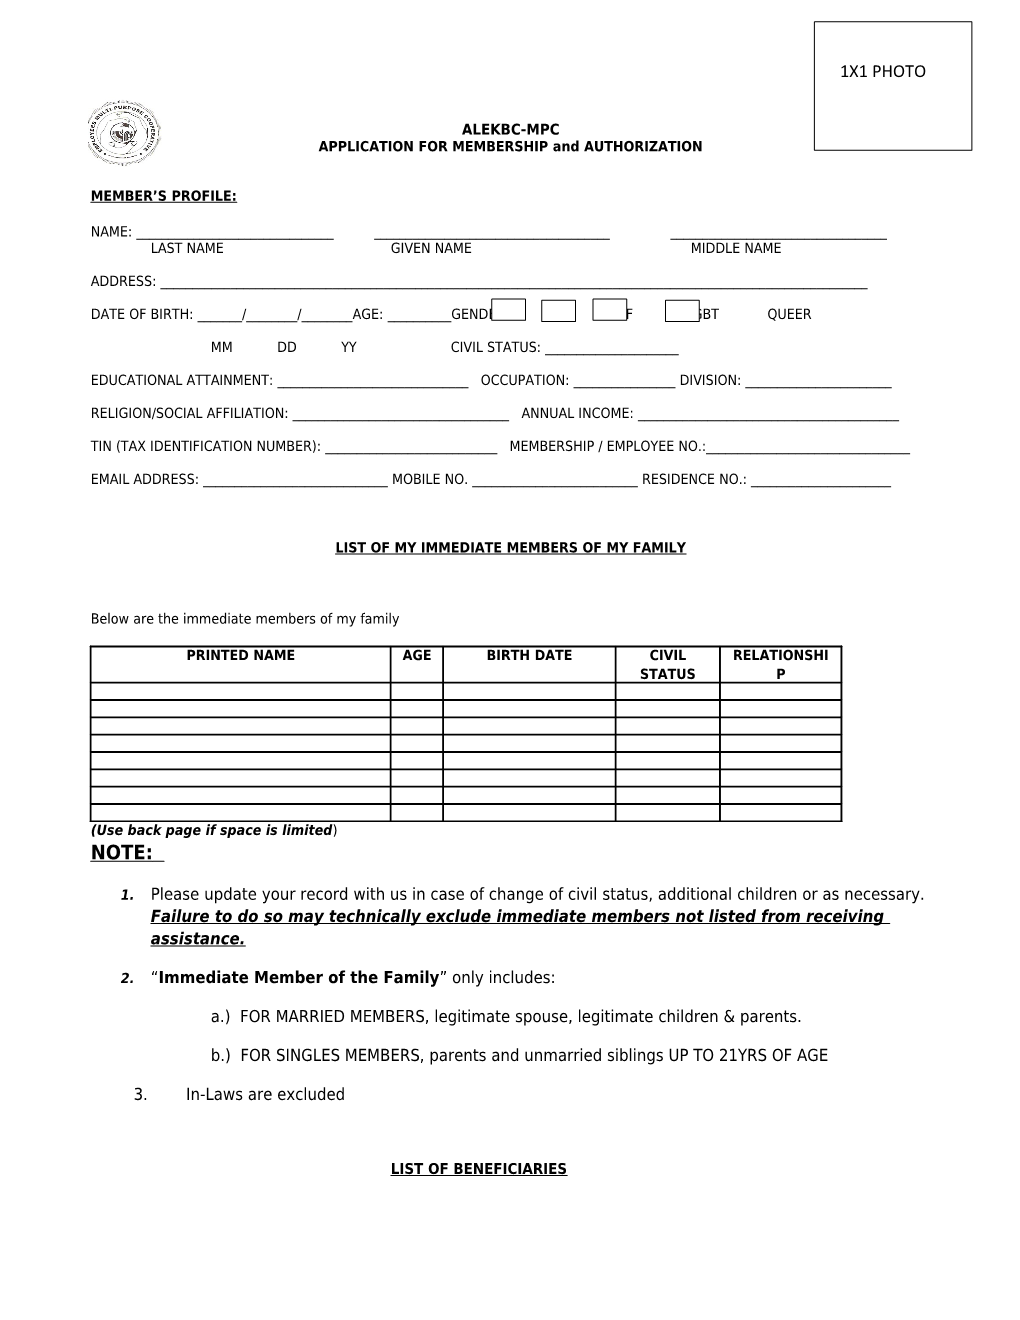 APPLICATION for MEMBERSHIP and AUTHORIZATION